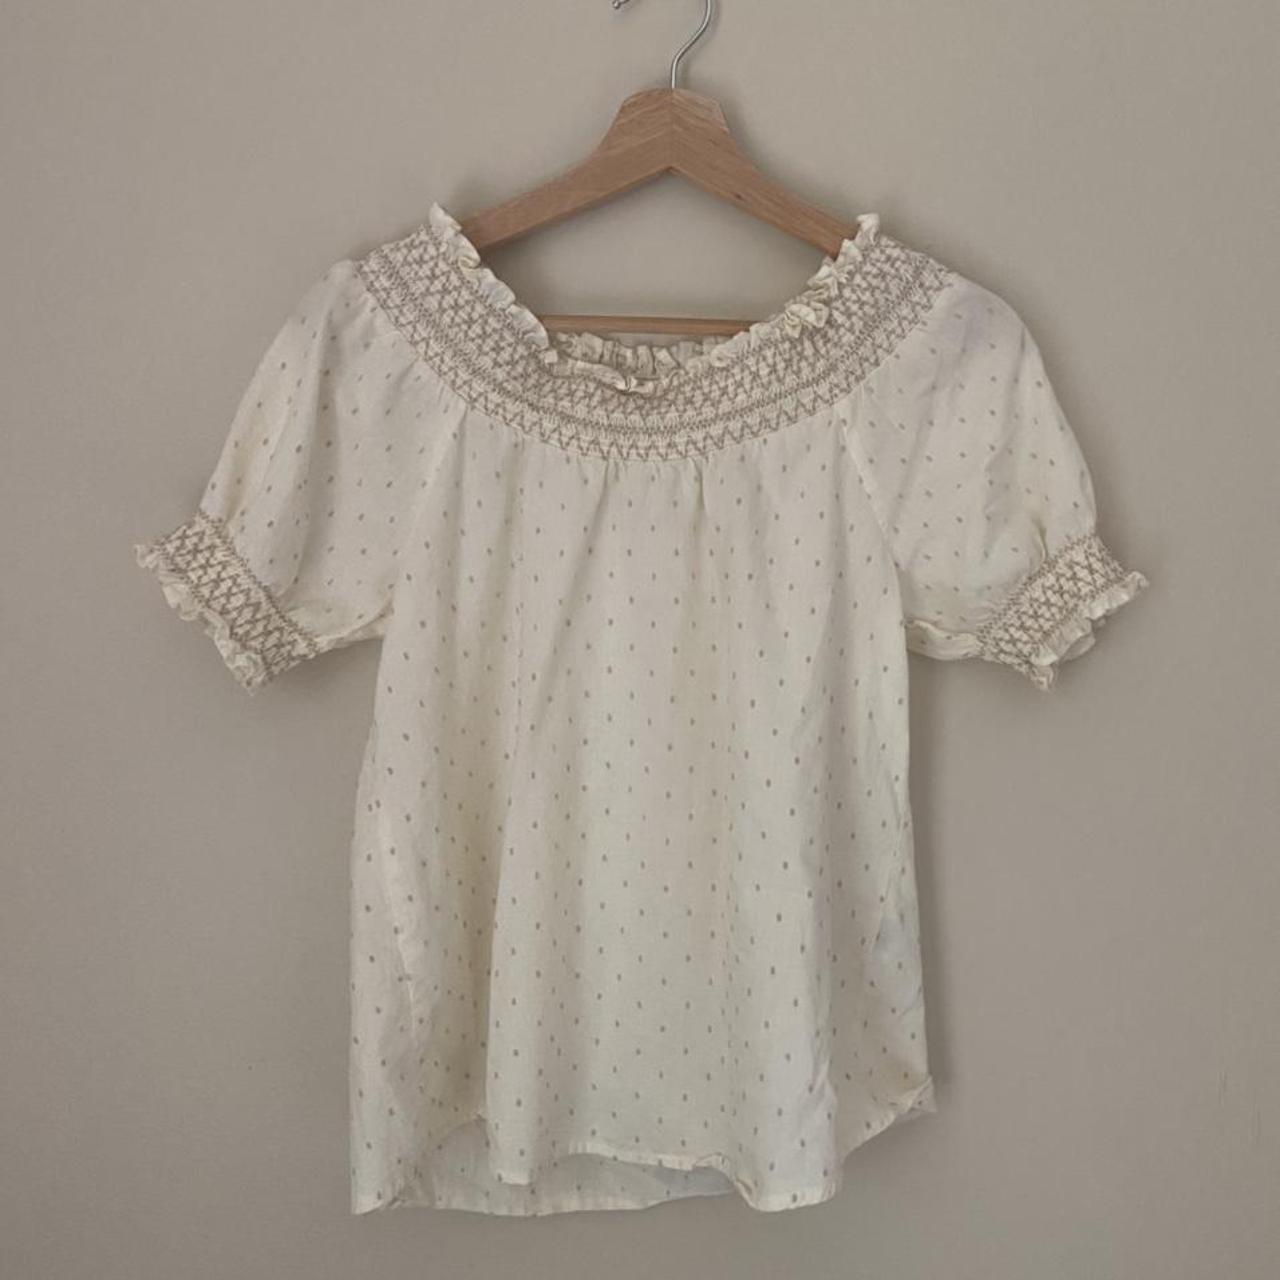 Product Image 1 - Doen-inspired top from Adored Vintage